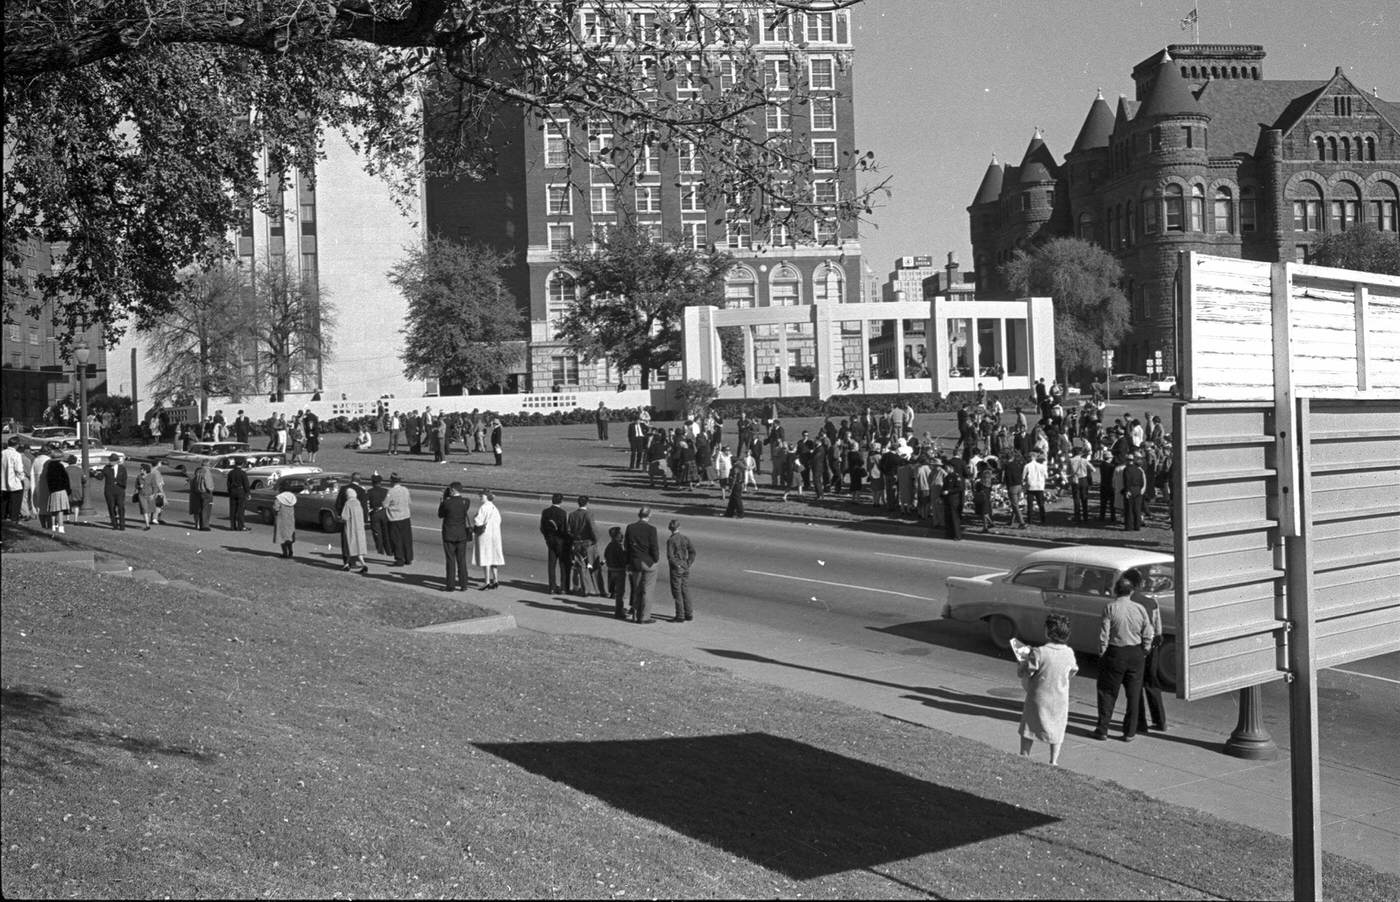 Dealey Plaza after the assassination of President John F. Kennedy, Dallas, Texas, 1963